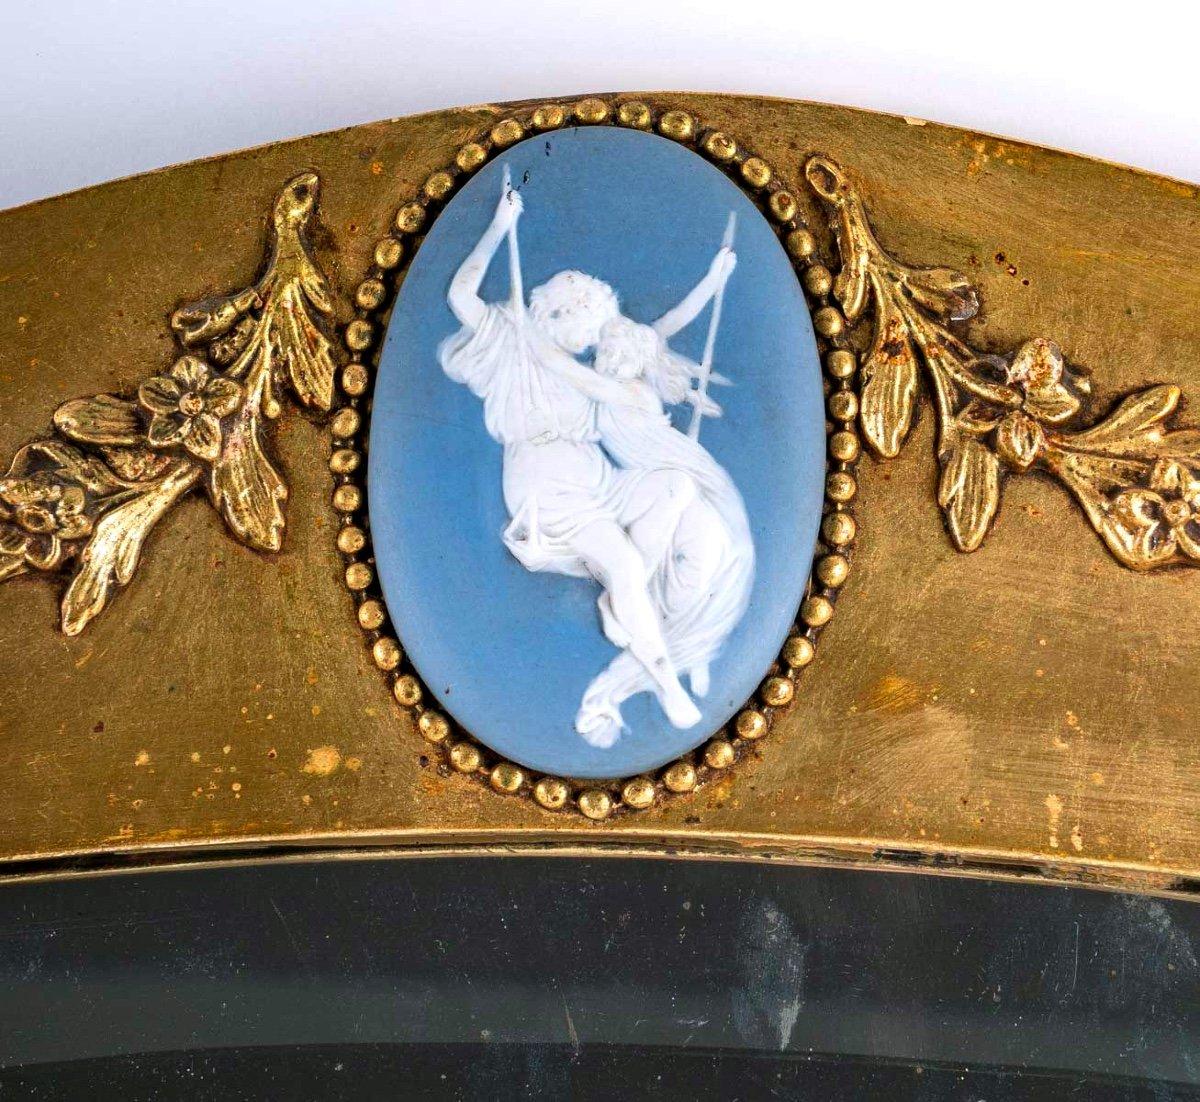 Lovely oval-shaped giltwood mirror. Its original glass is bevelled.
Its pediment decorated with floral garlands reveals in its center a delicious blue jasper Wedgwood porcelain medallion representing a young biscuit couple, seated on a swing